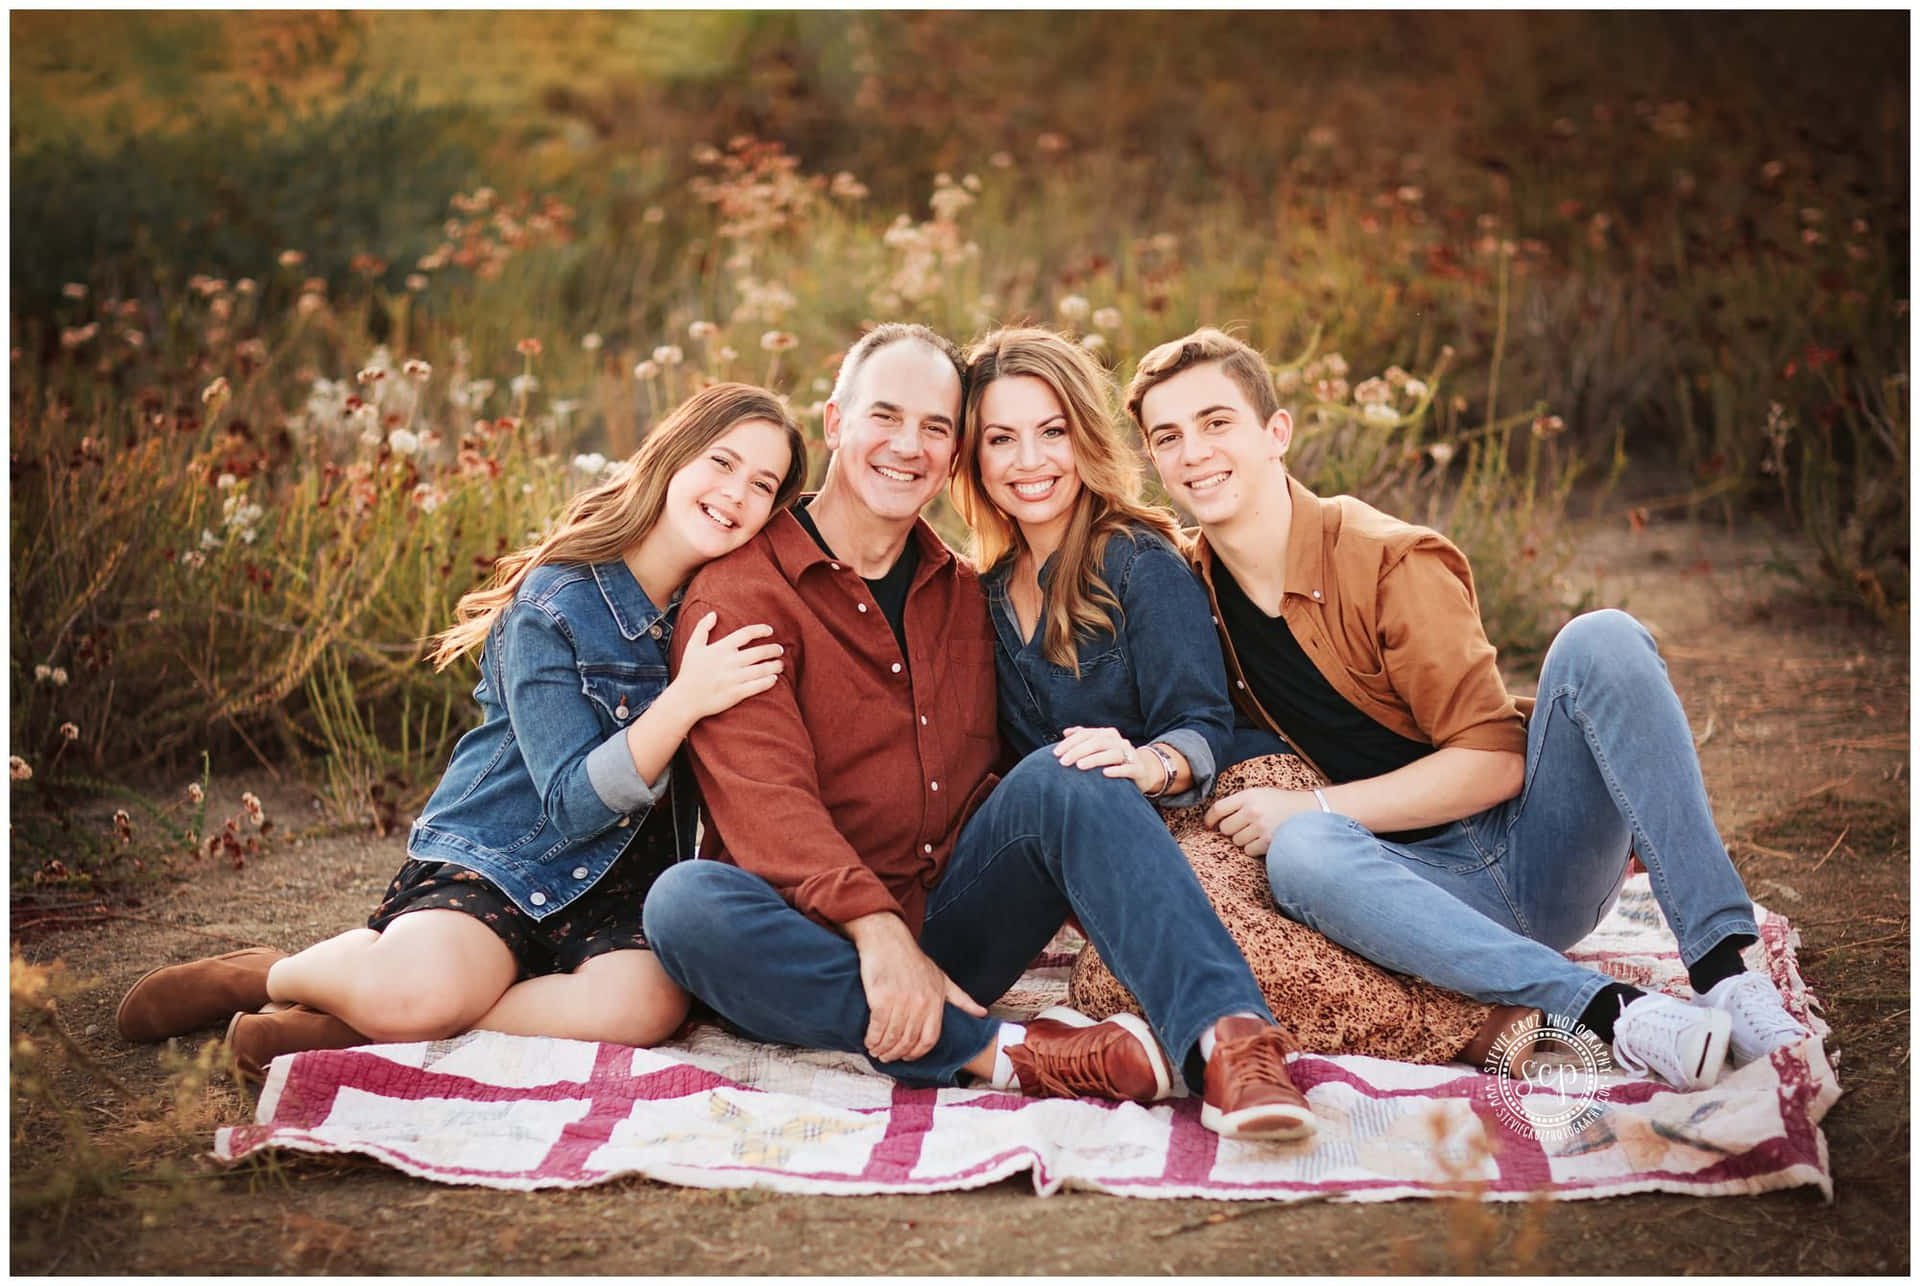 ____ Accompanied by the crisp autumn air, a happy family poses for a perfect fall family photo.